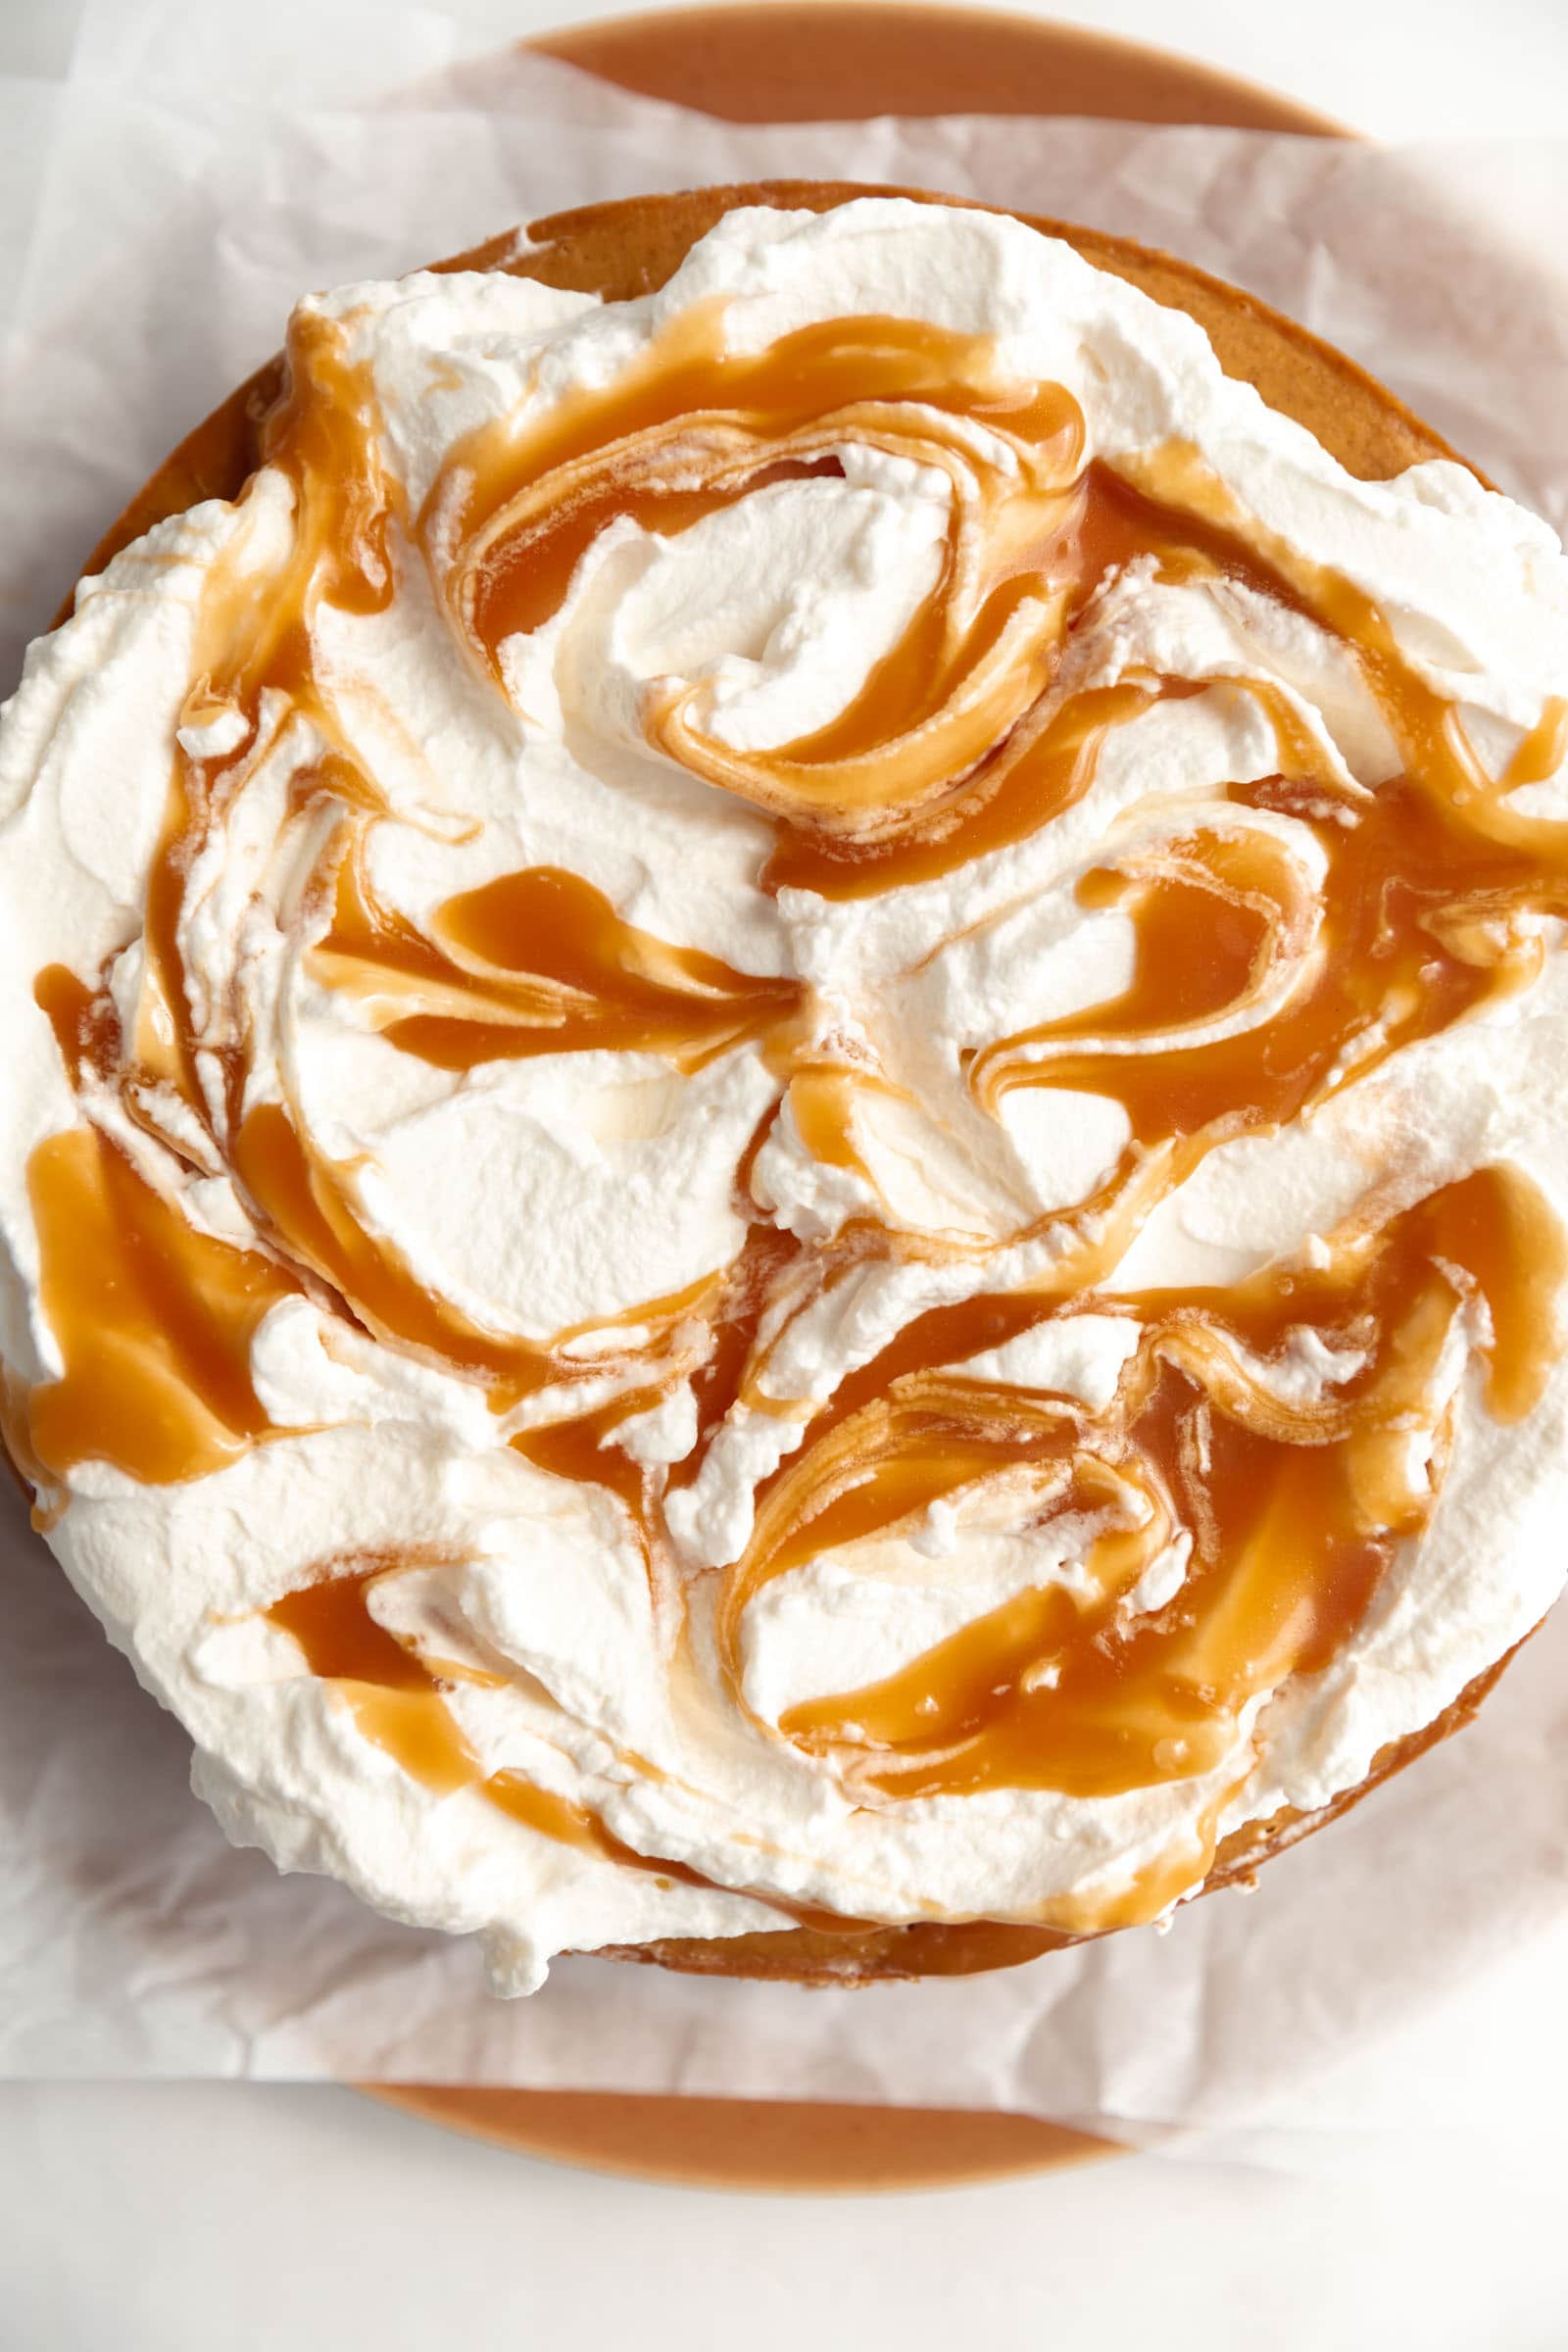 whipped cream and caramel on top of pumpkin cheesecake